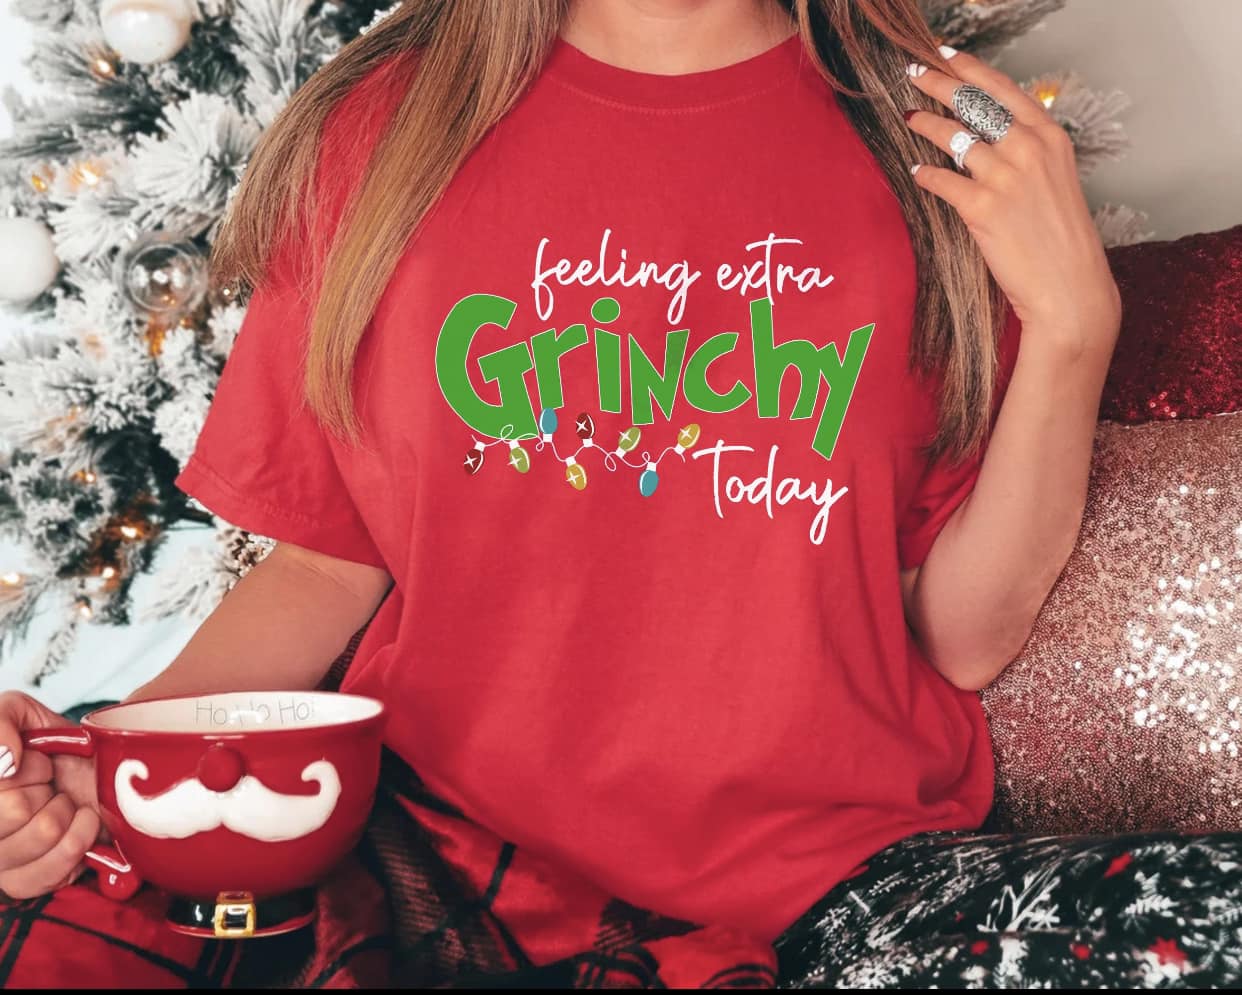 FEELING EXTRA GRINCHY TODAY - WHITE